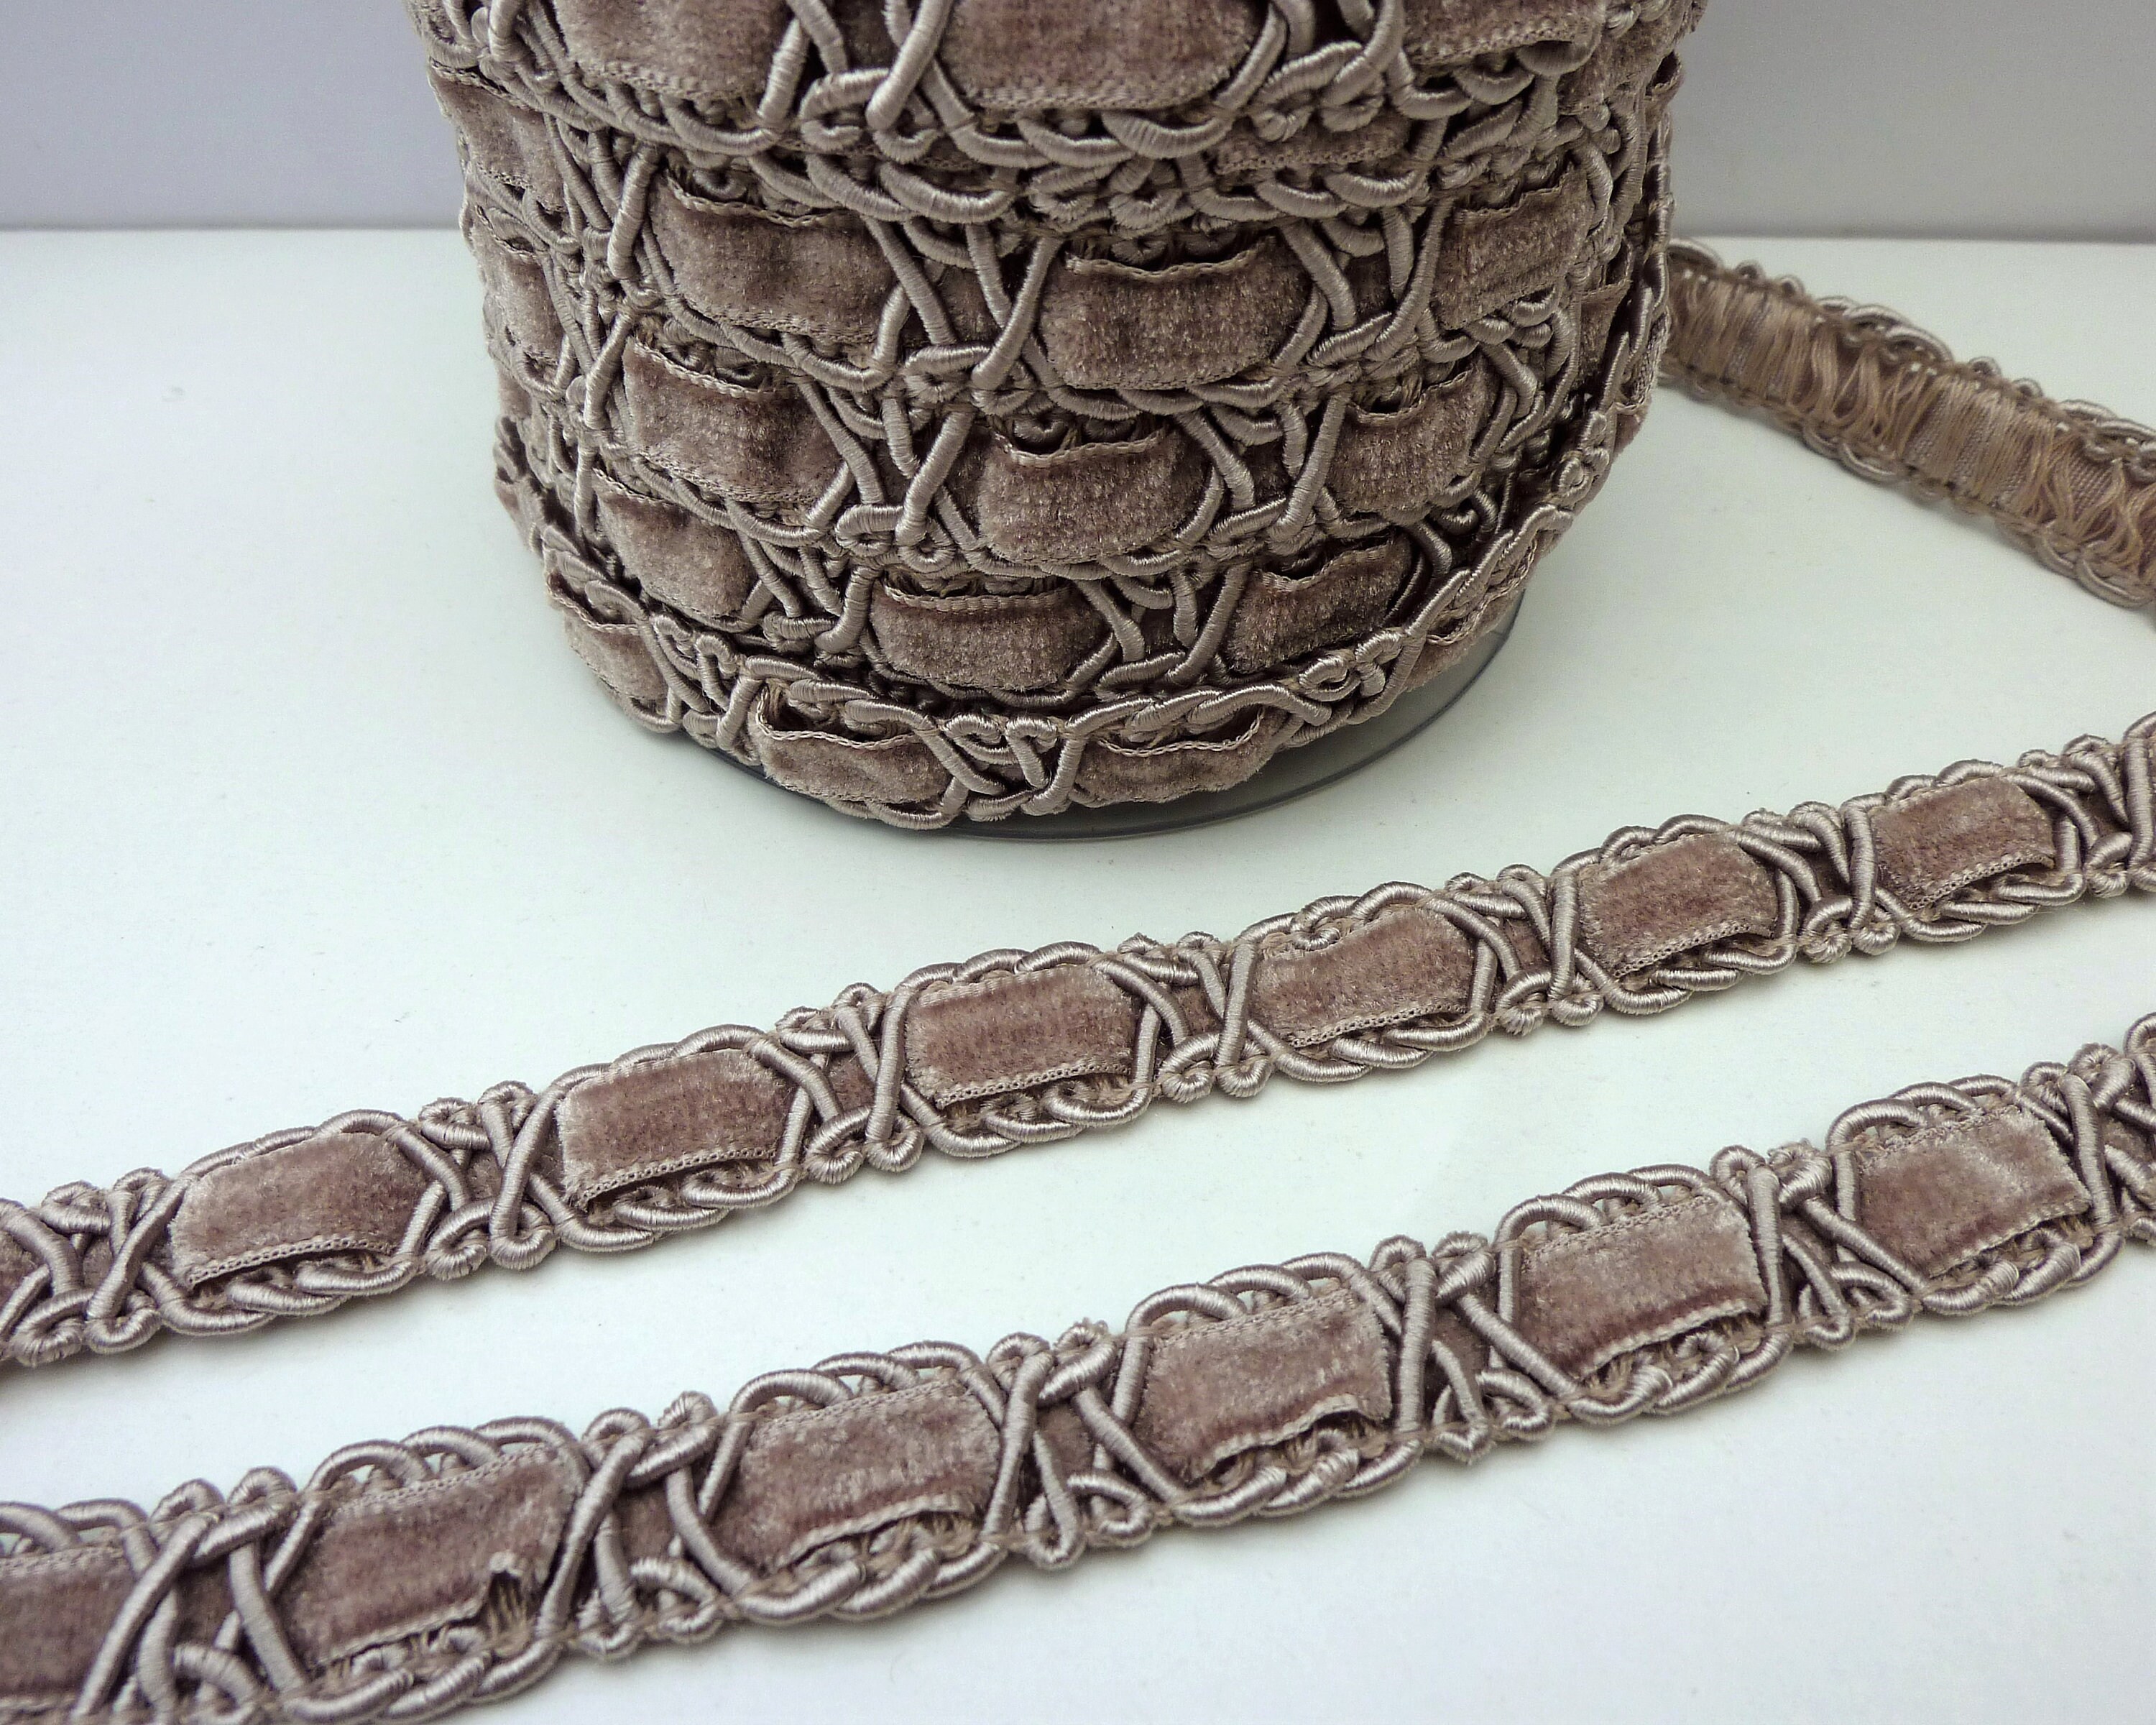 Taupe Grey Brown Upholstery Trim, Scrolled Gimp Braid, Lampshade